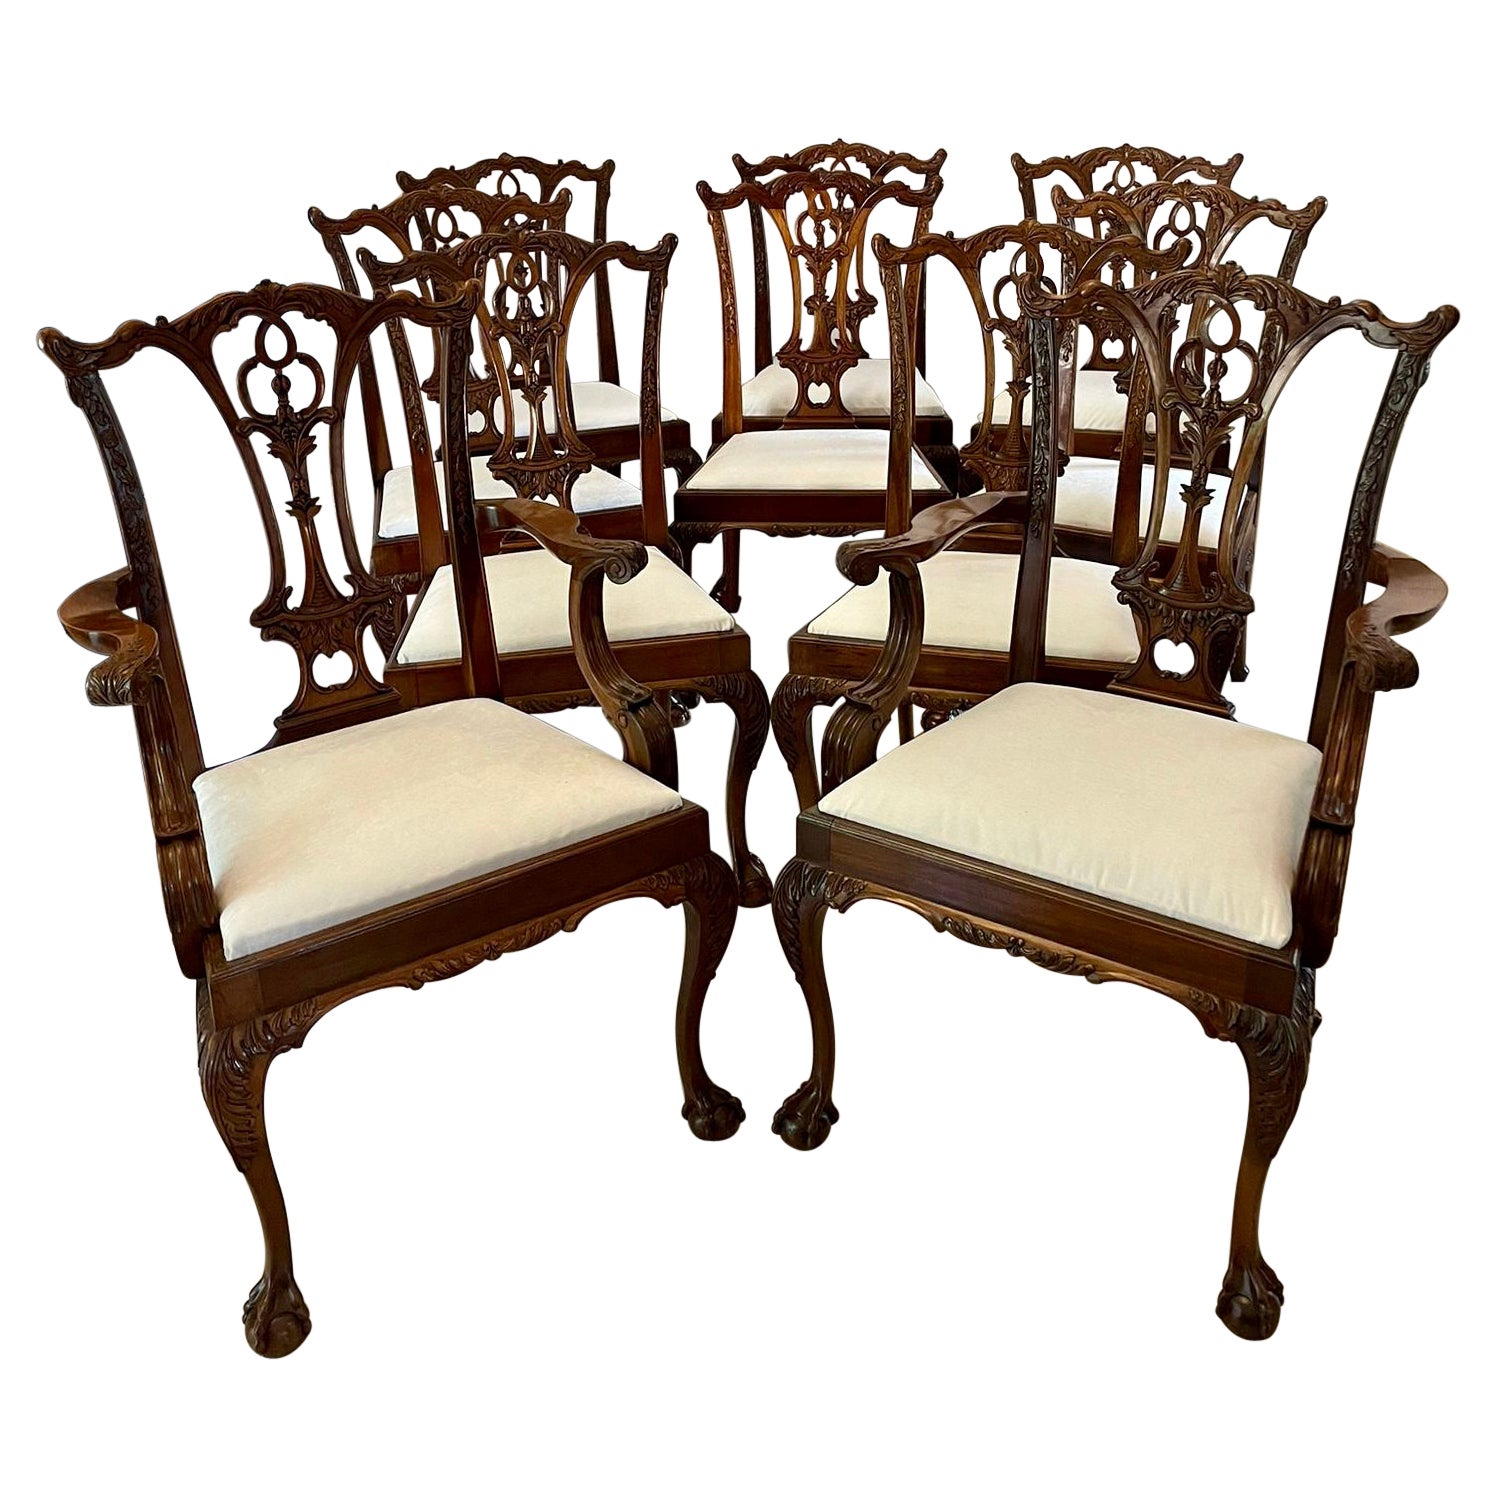 Fine Quality Set of 10 Antique Carved Mahogany Dining Chairs